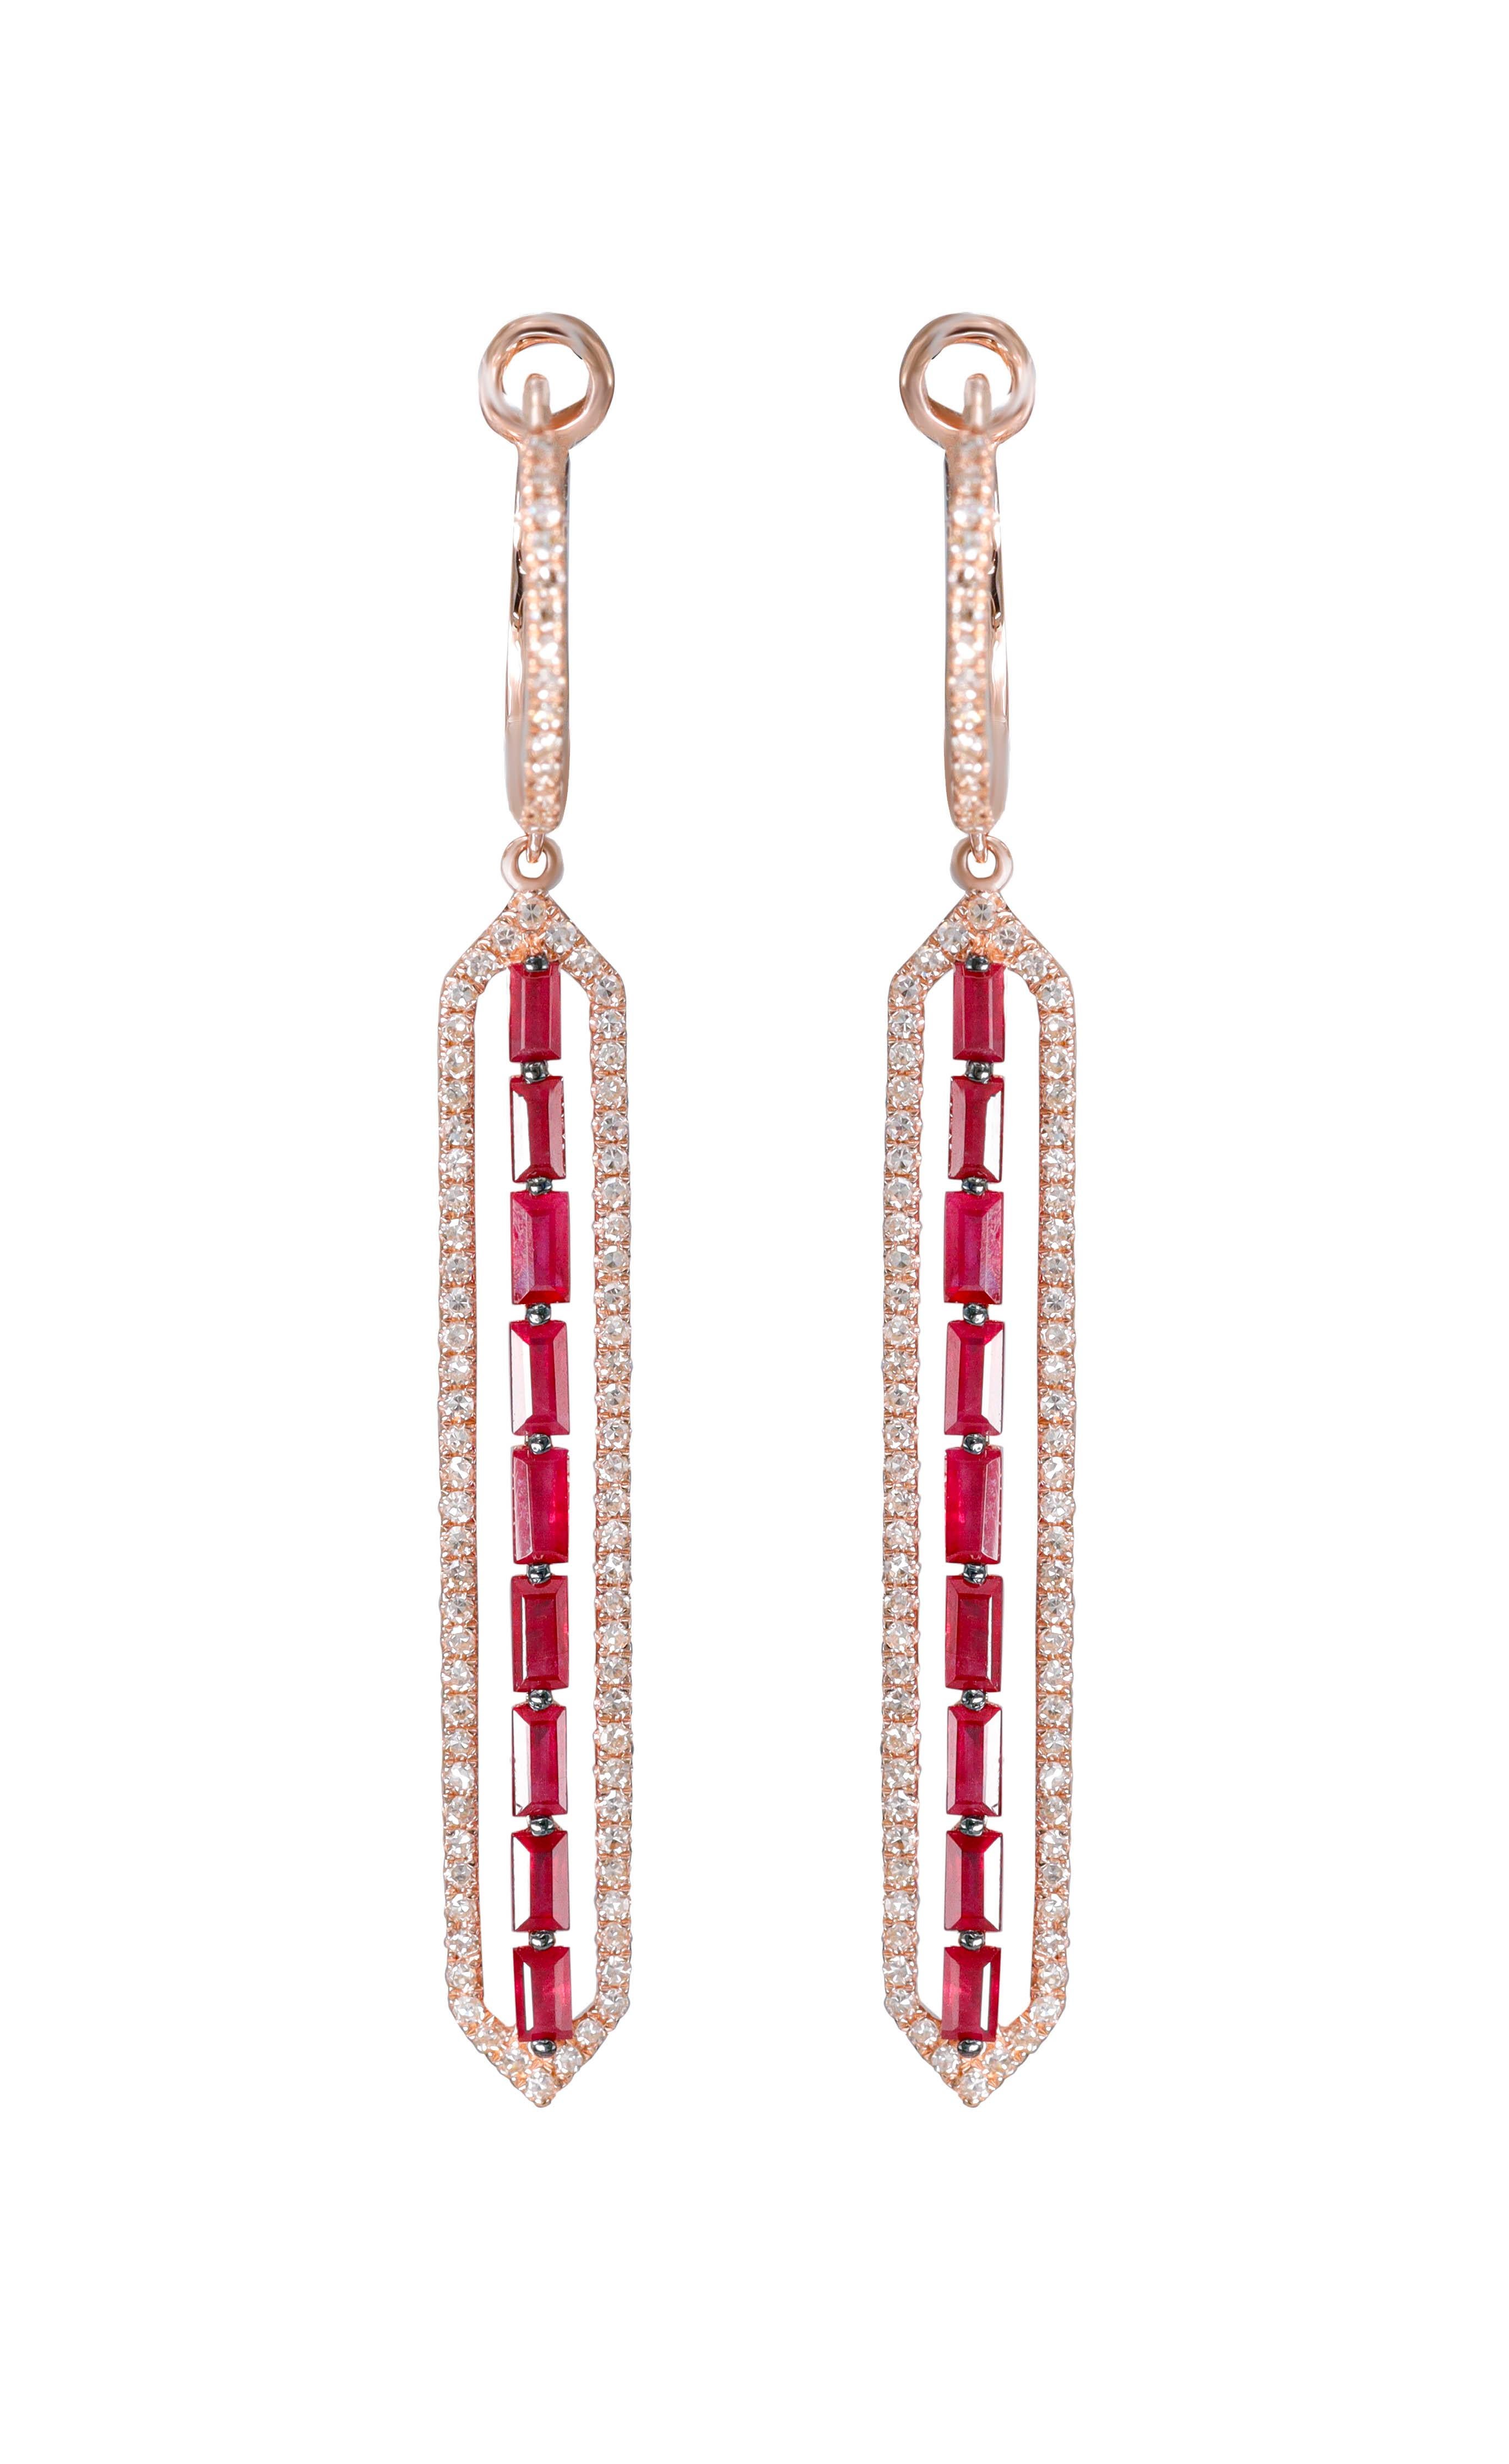 14K Rose Gold Ruby and Diamond Earrings featuring 1.38 Carat T.W. of Natural Rubies and 0.46 Carats T.W. of Diamonds

Underline your look with this sharp 14K Rose Gold Diamond and ruby Earrings. High quality Diamonds and rubies. This Earrings will